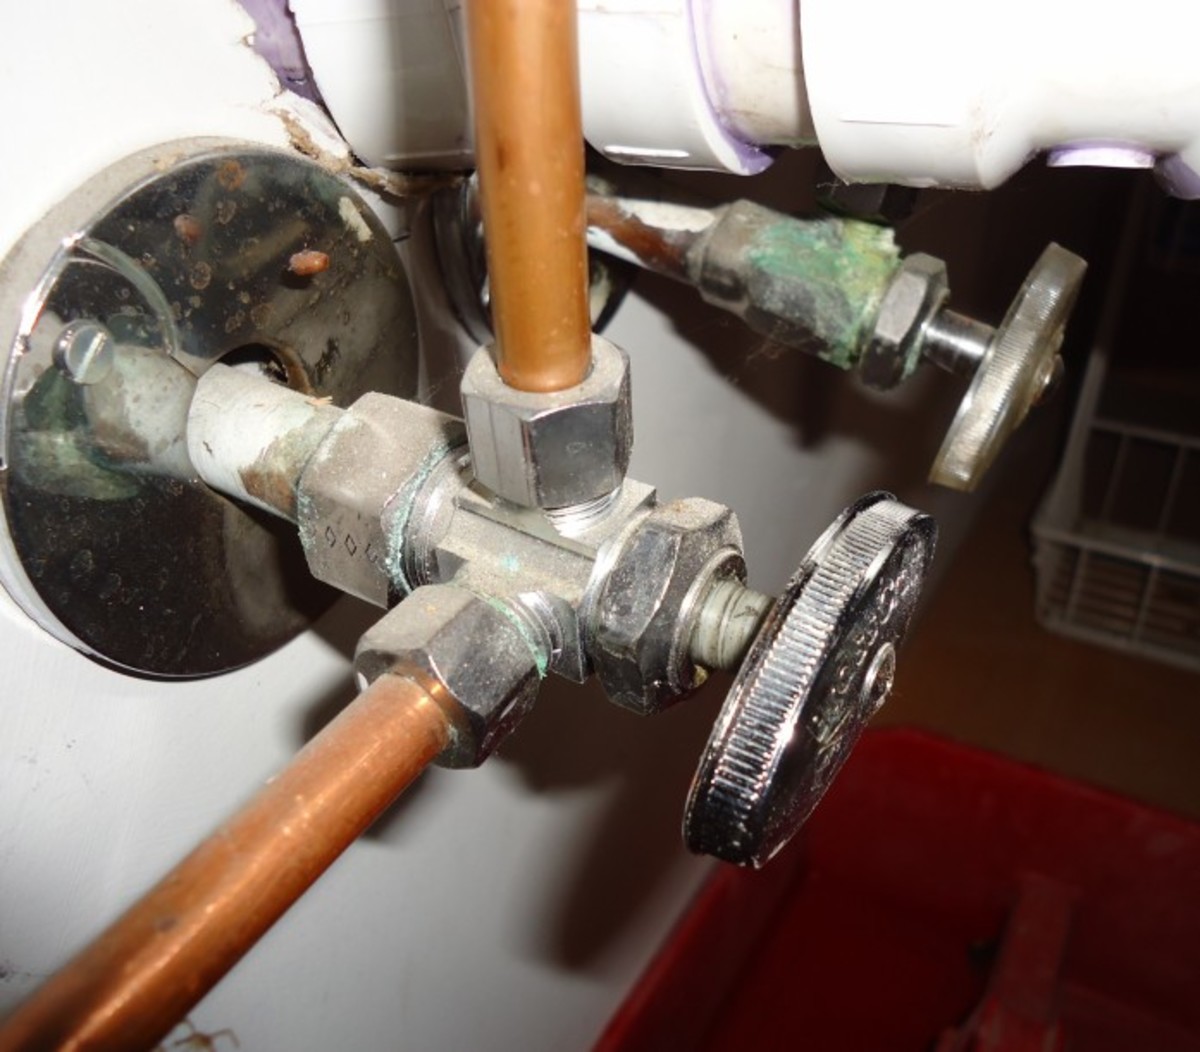 What is the Water Shut-Off Valve and Where to Find Them?